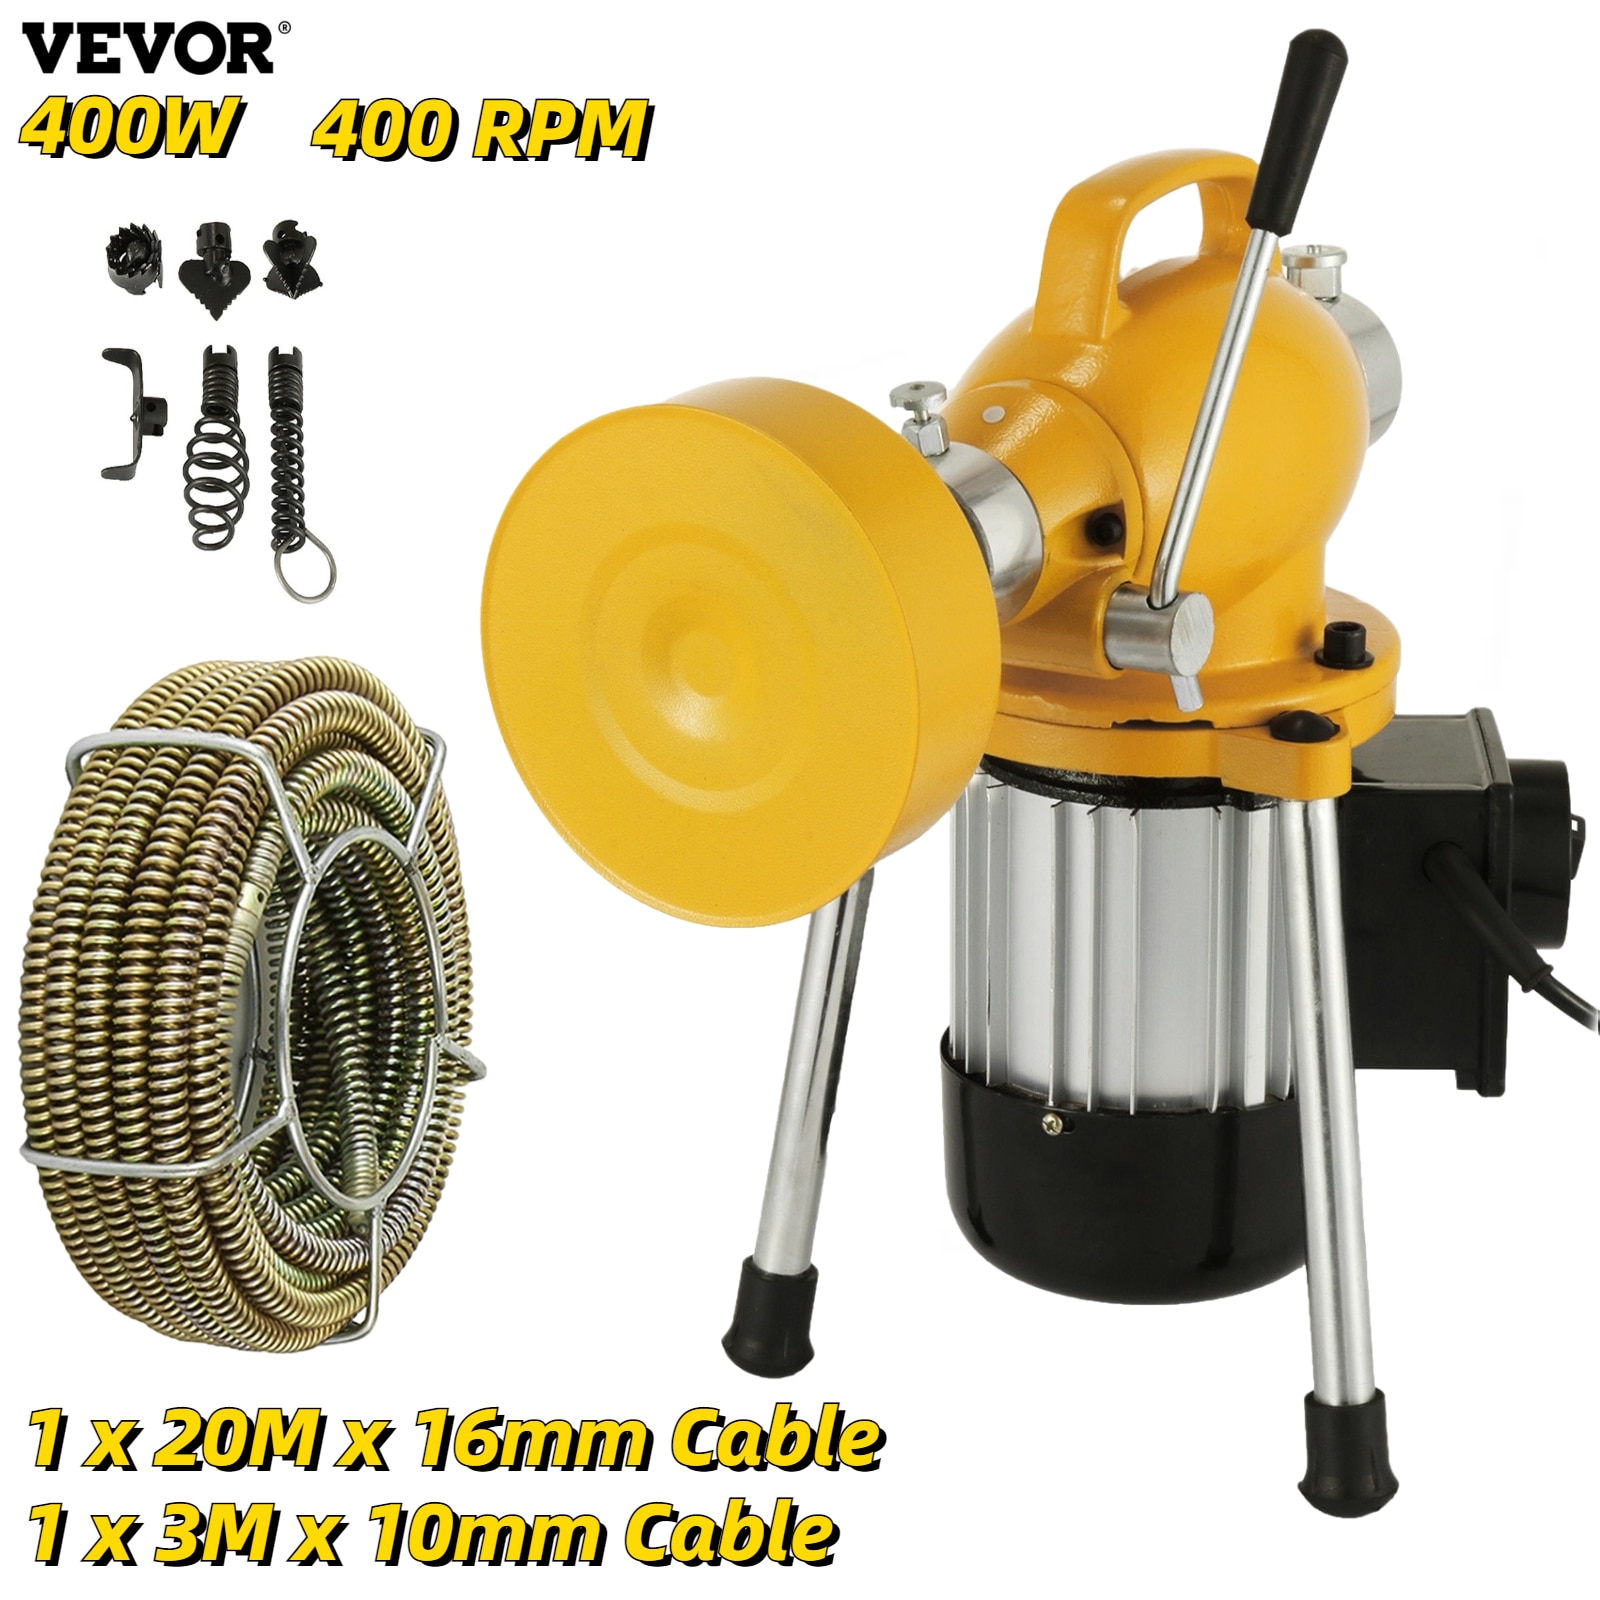 VEVOR Professional Dredge Machine 400W Electric Pipe Plunger Household Sink Sewer Toilet Blockage Tube Unblocker Cleaning Tools 1